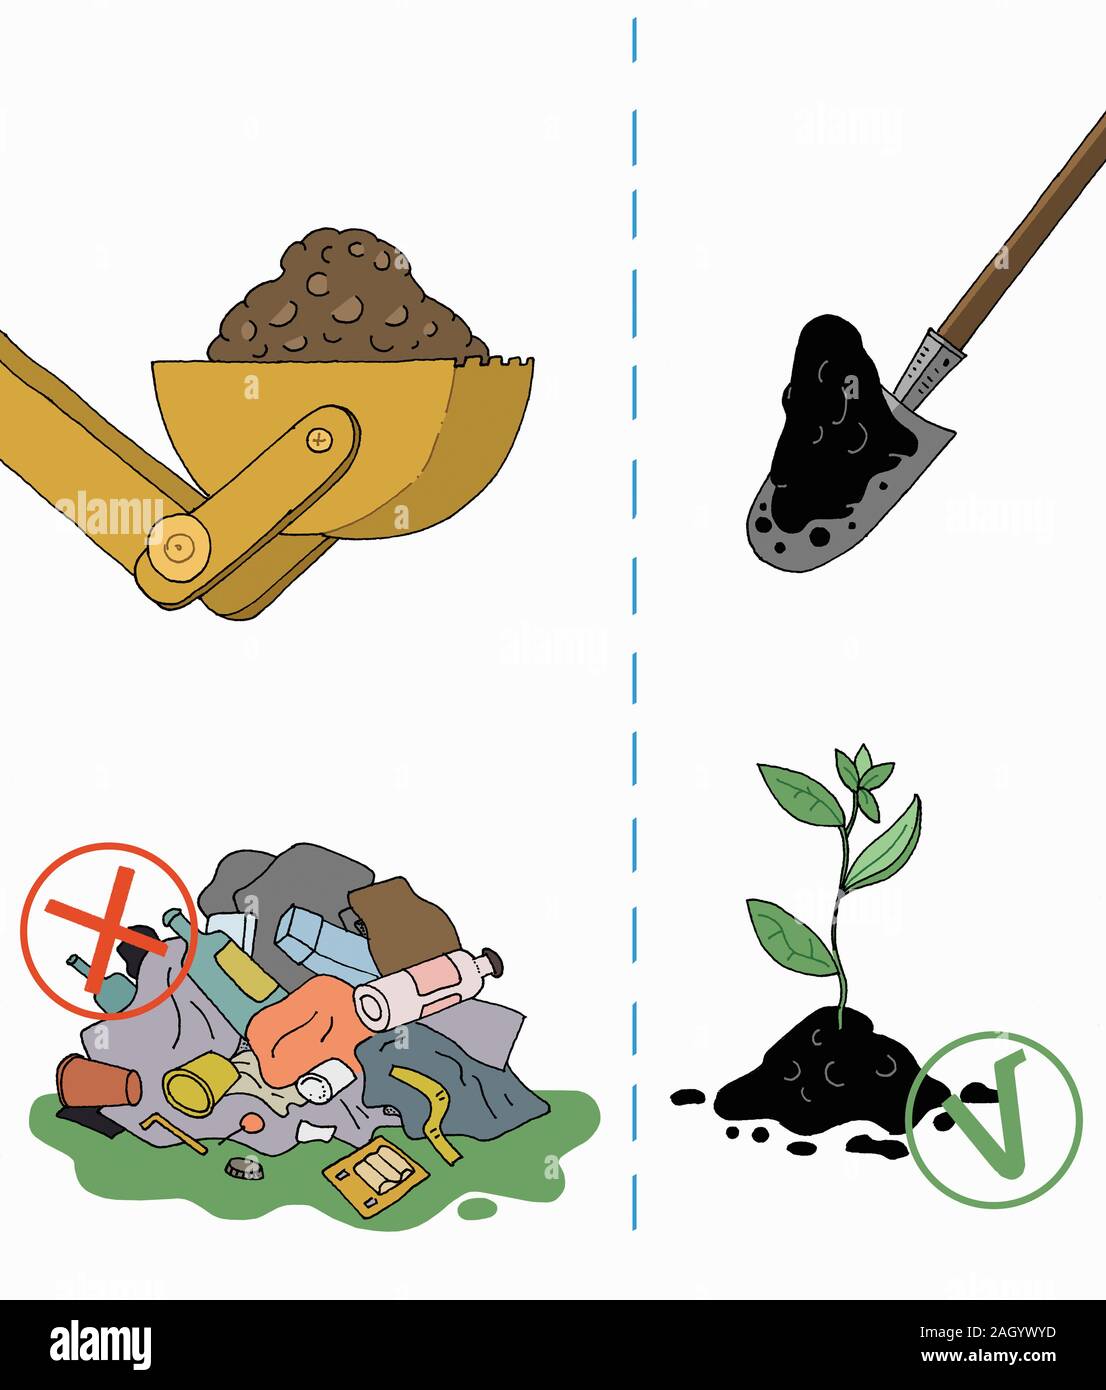 Contrast between using land for landfill versus growing plants Stock Photo